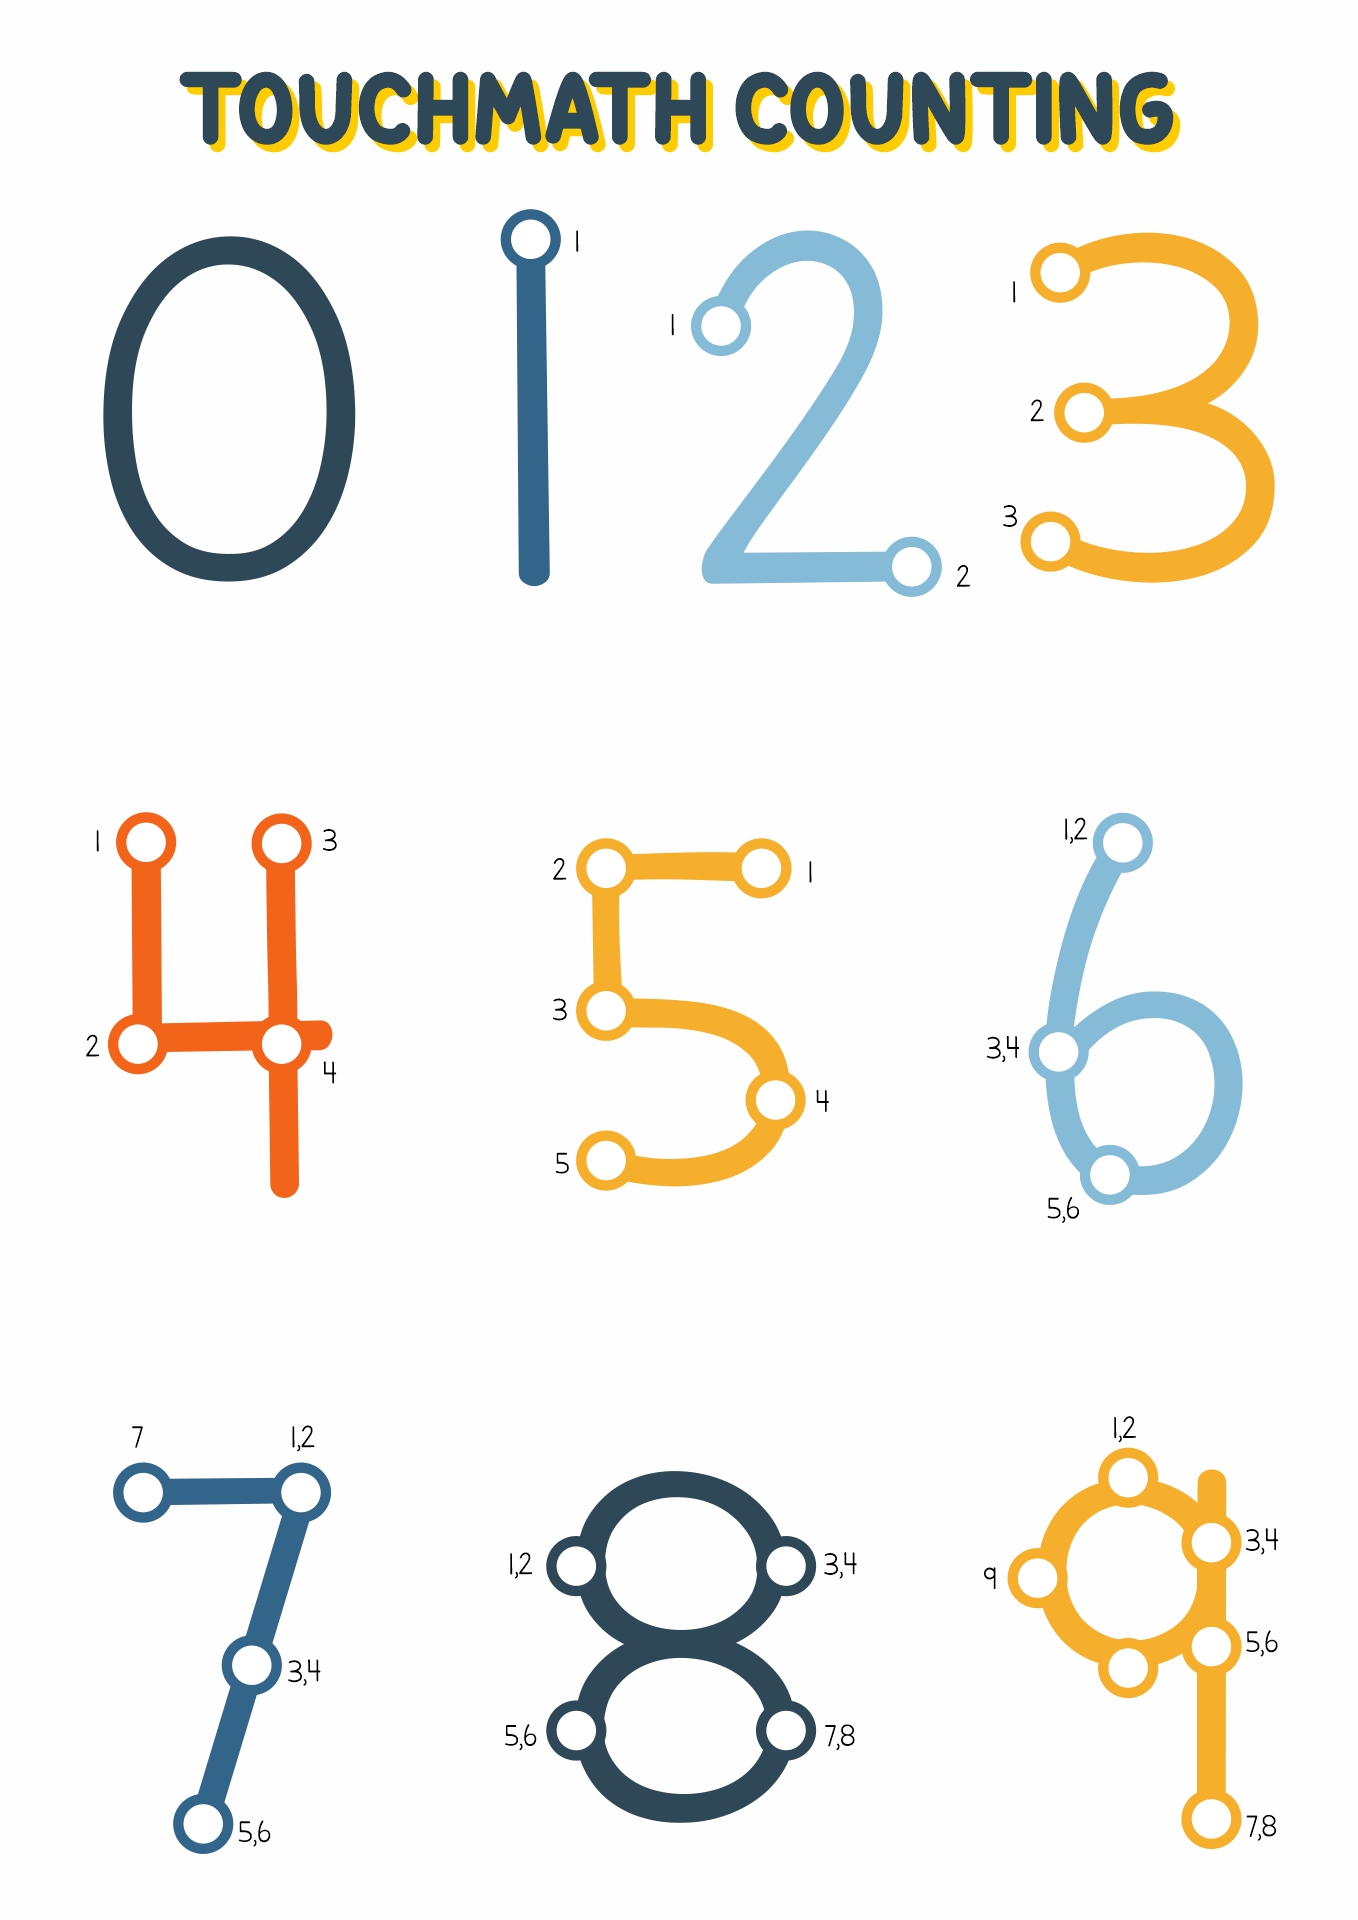 Teaching TouchMath Counting Pattern Image